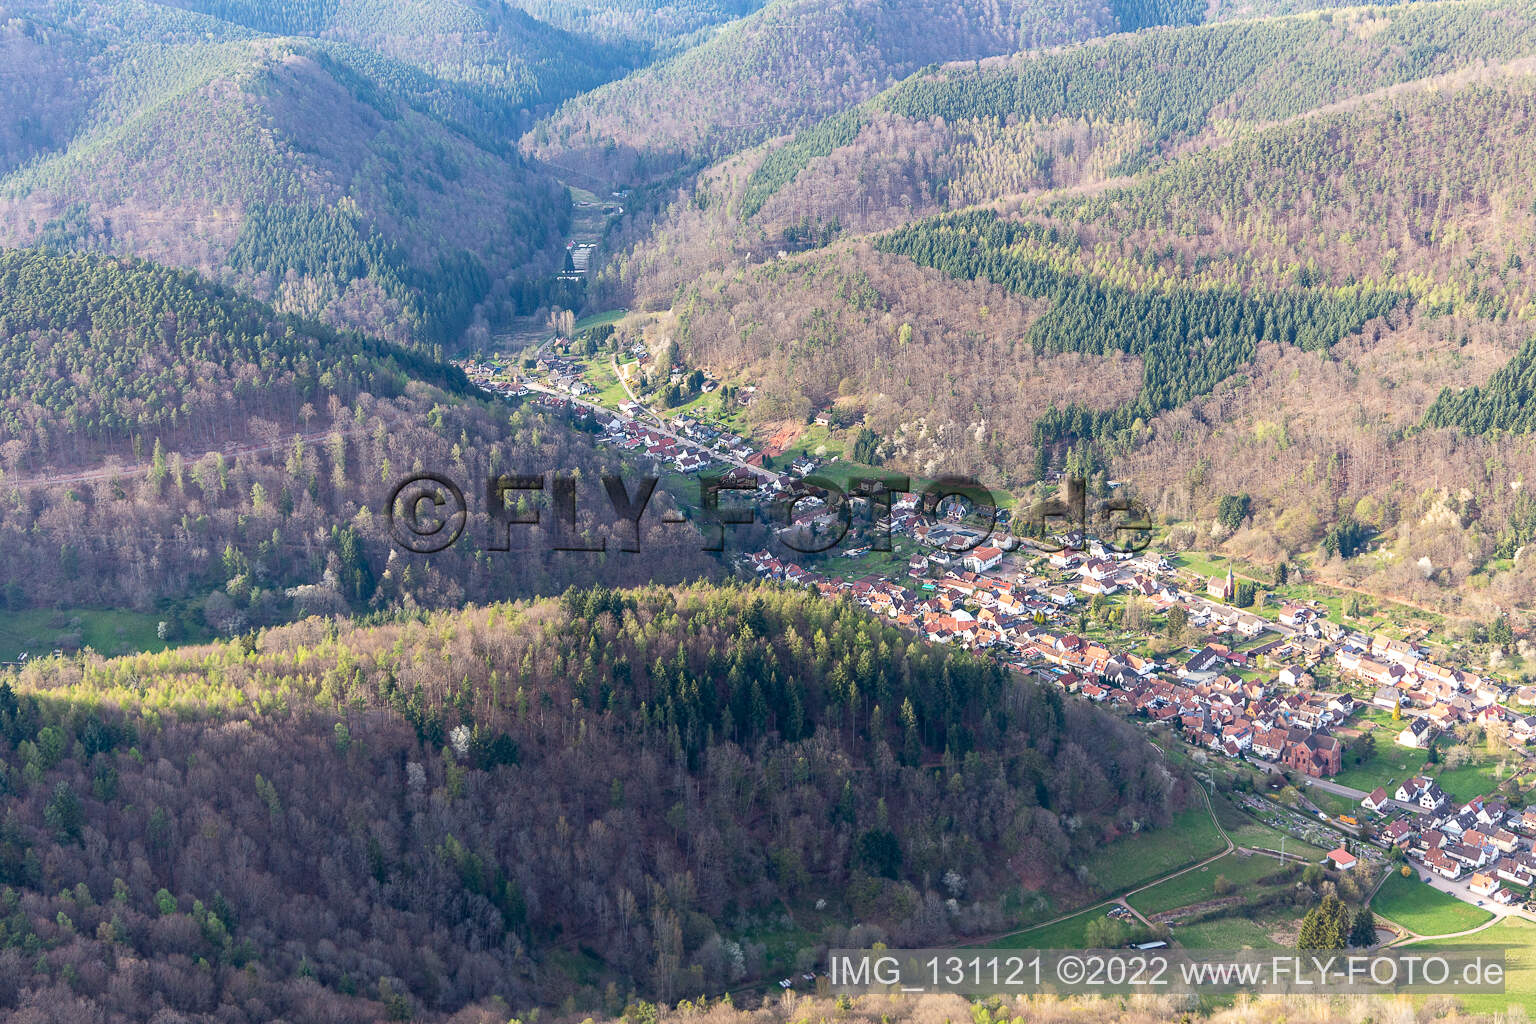 Eußerthal in the state Rhineland-Palatinate, Germany from a drone